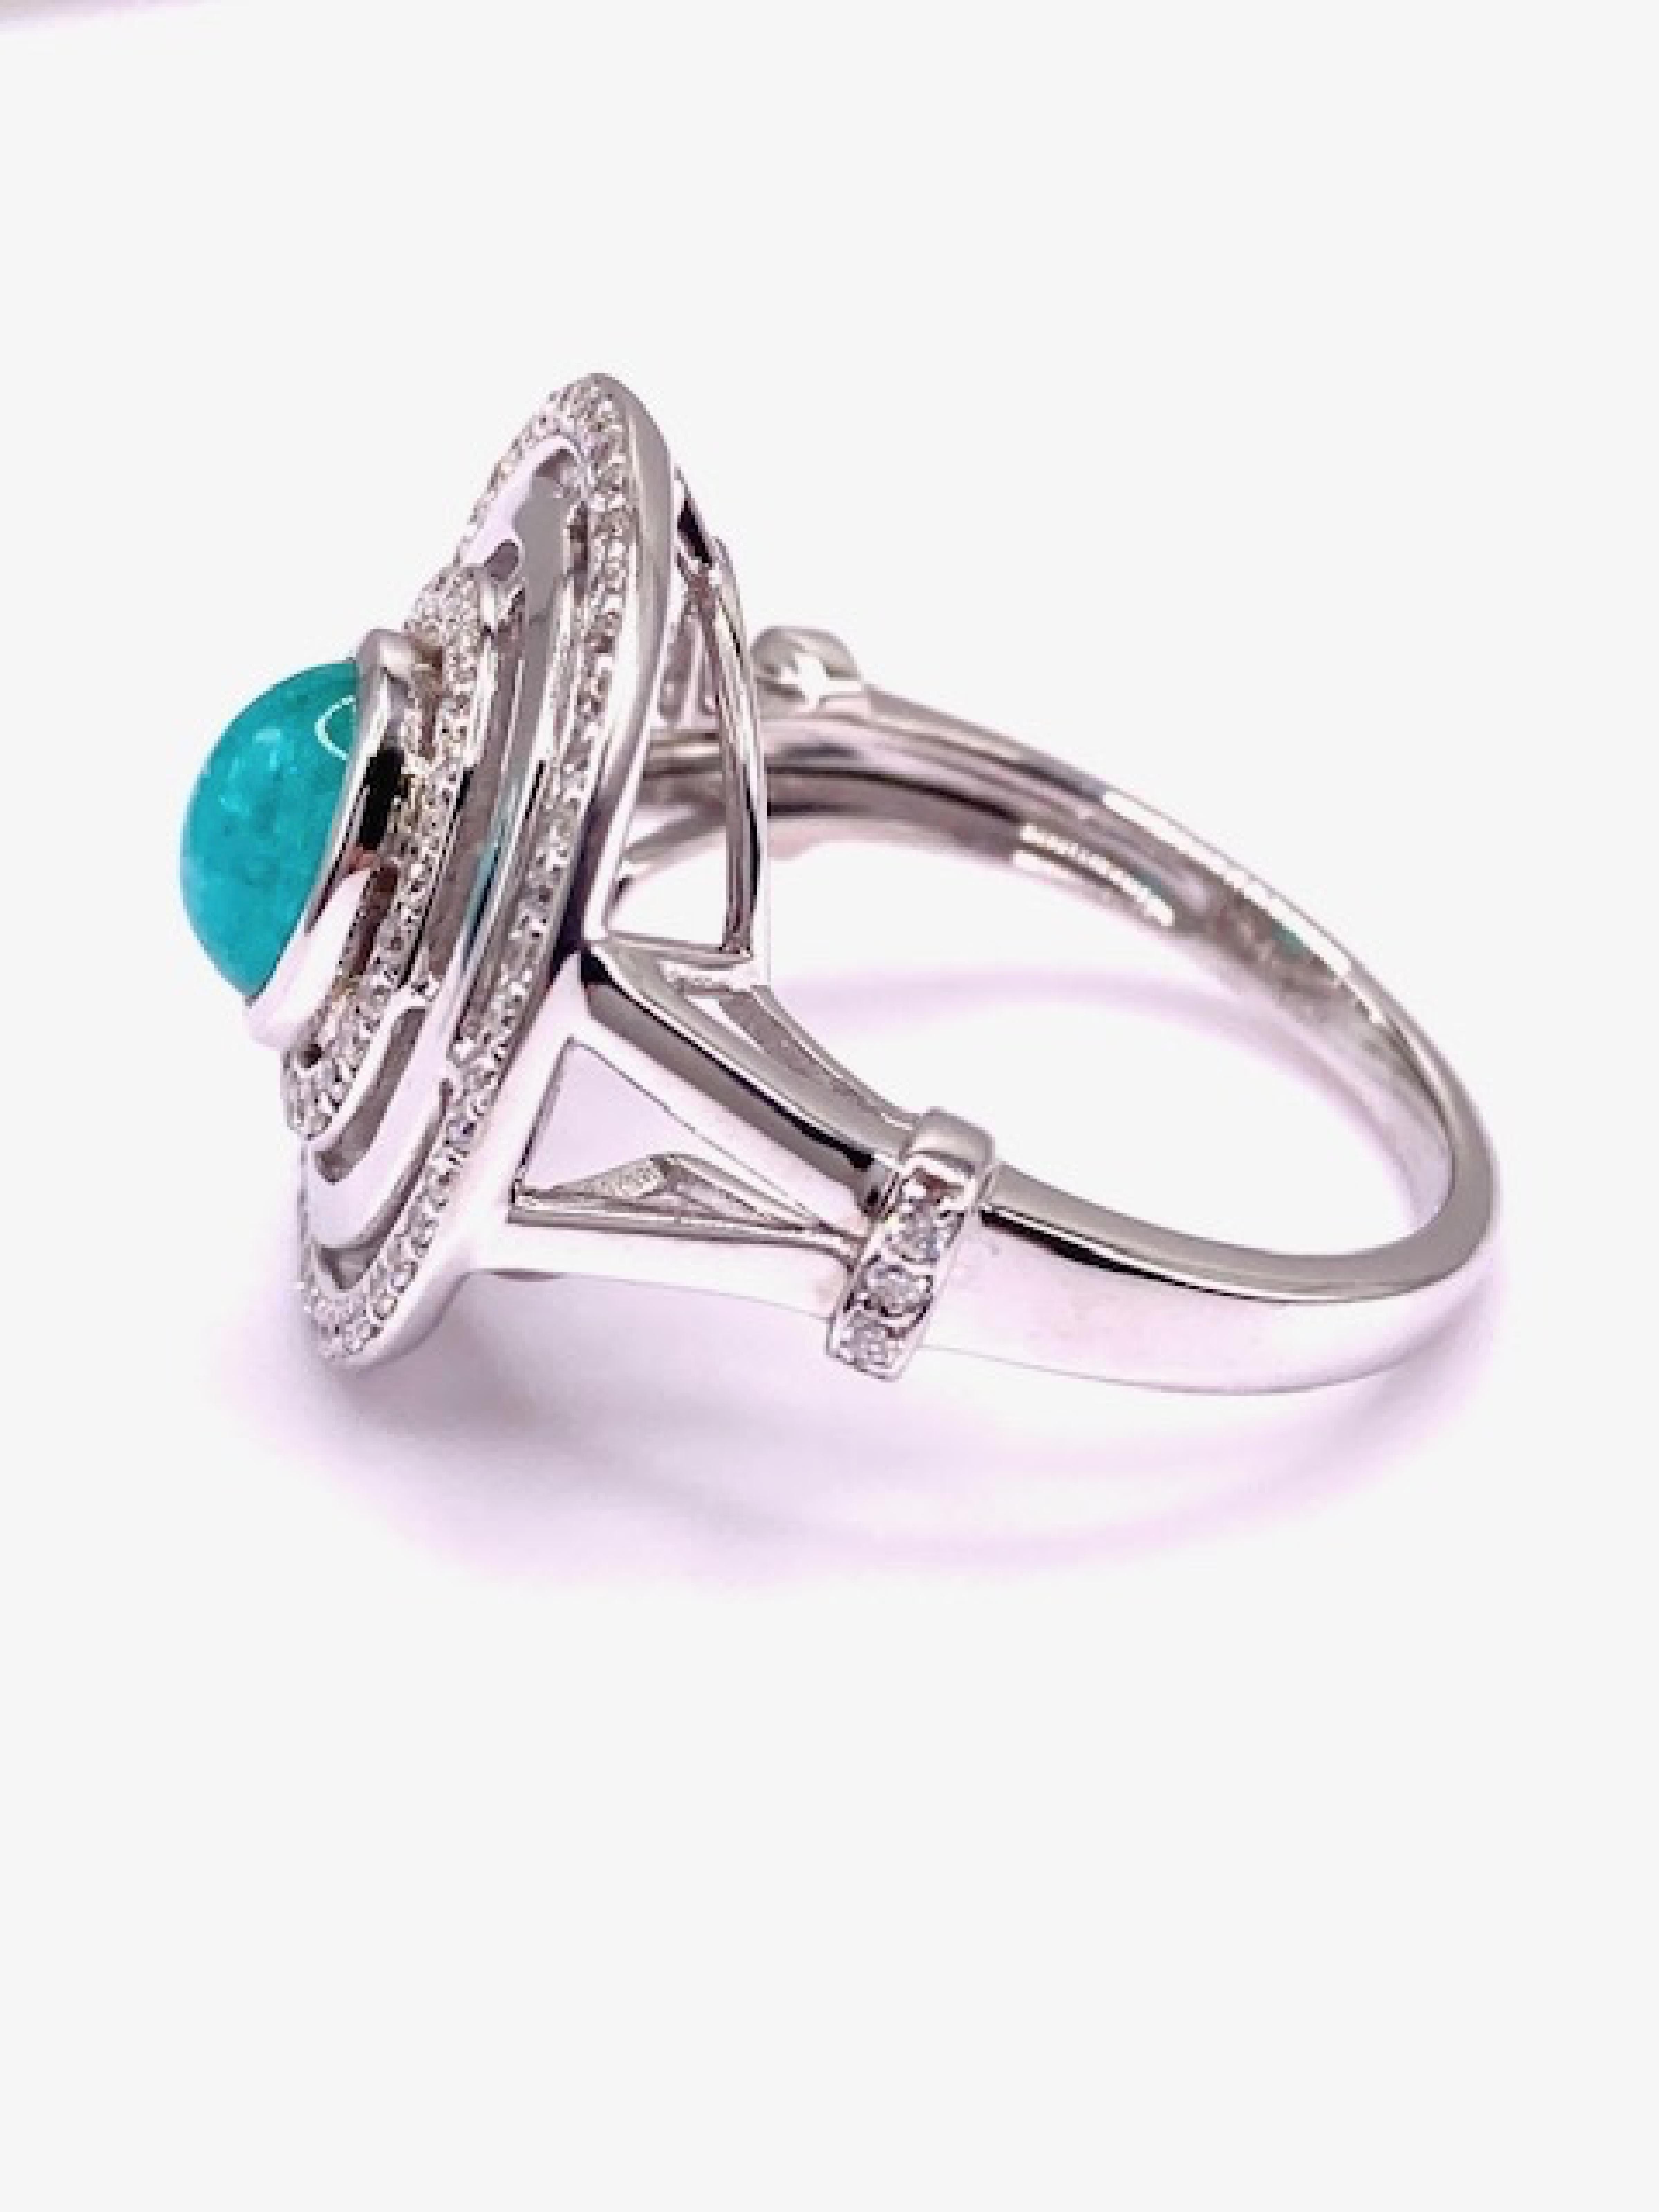 Inspired by Saturn, this one Carat Brazilian Paraiba Tourmaline is neon blue and set in 14 Karat white gold. 